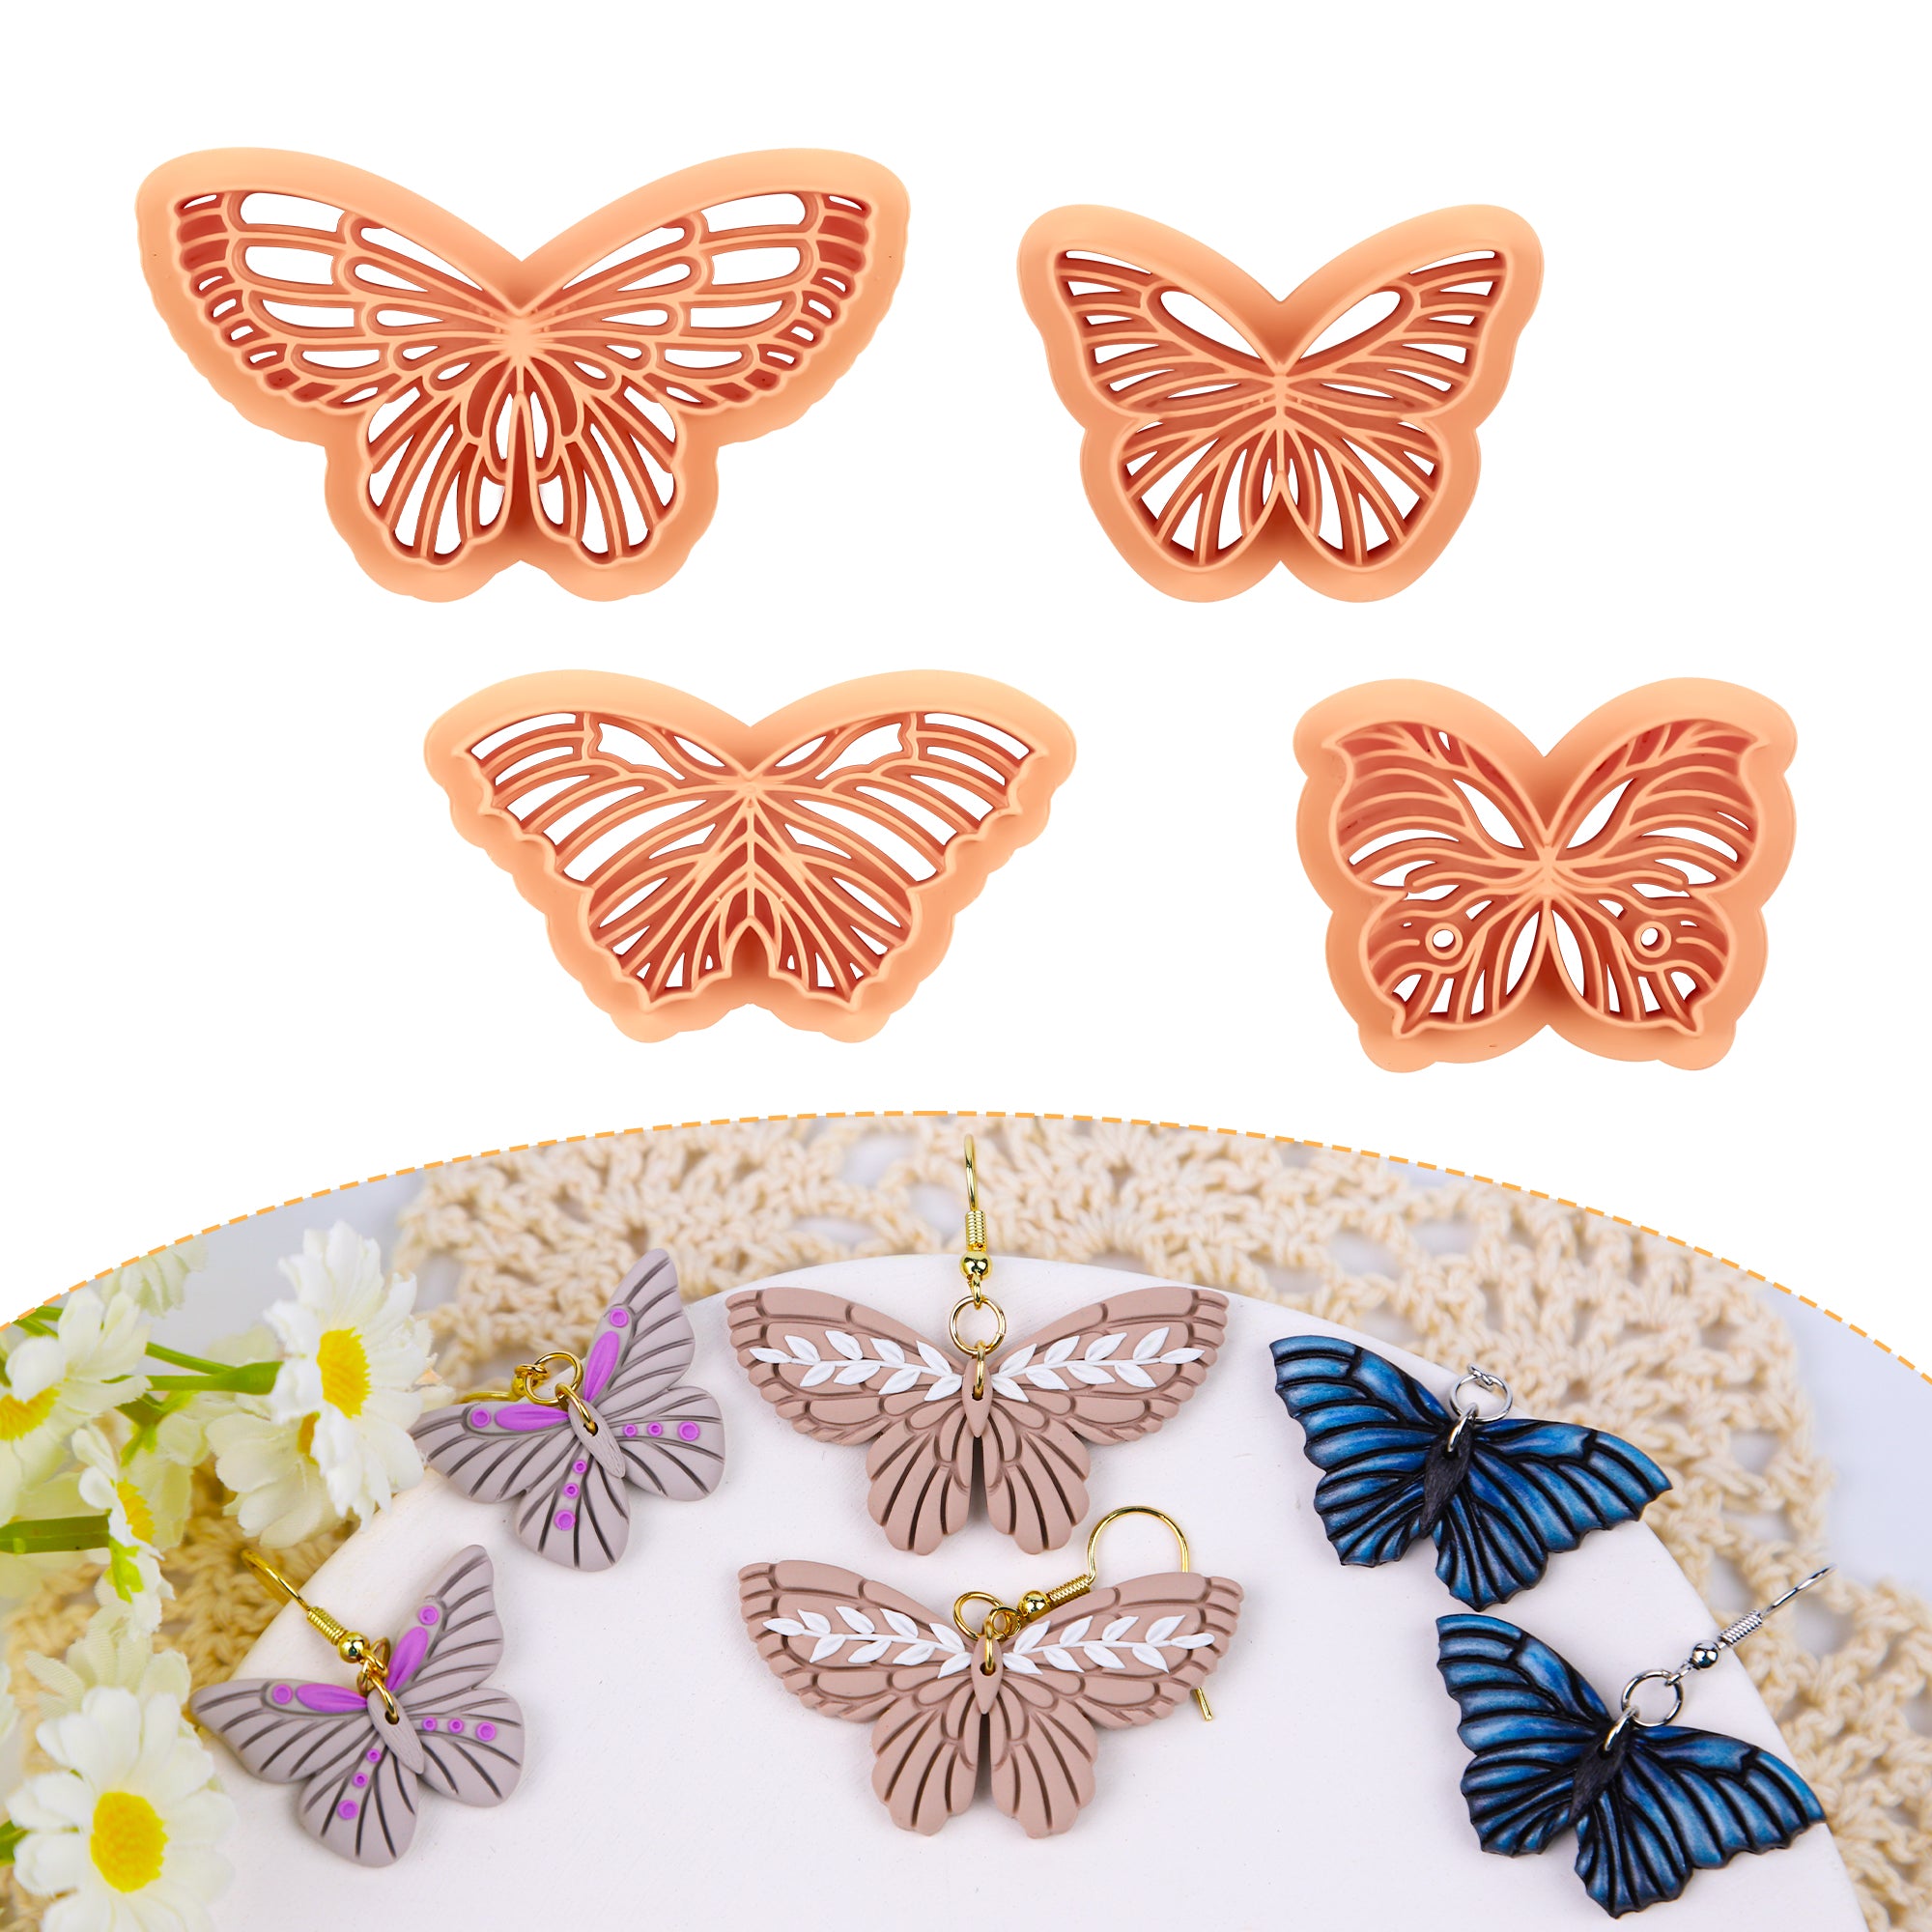 Puocaon Butterfly Polymer Clay Cutters 4 Pcs